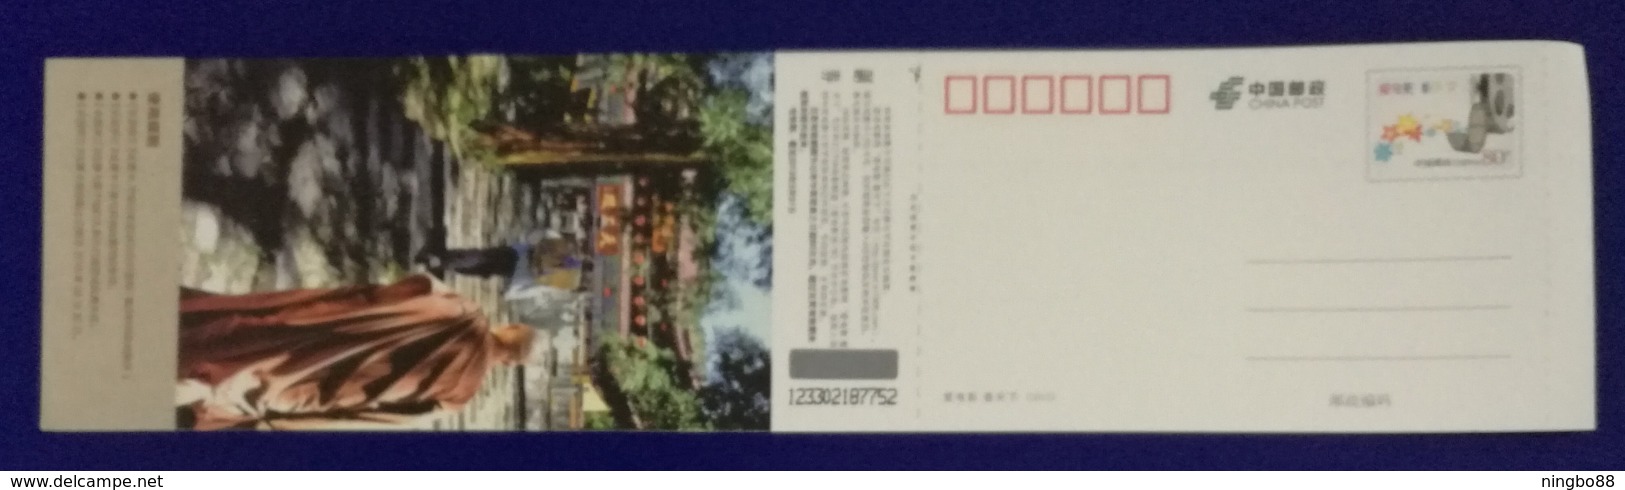 Cable Car,Zhaoming Temple Built In AC 535,CN 12 East Mt.Tianmushan Landscape Tourism Discount Ticket Pre-stamped Card - Other (Earth)